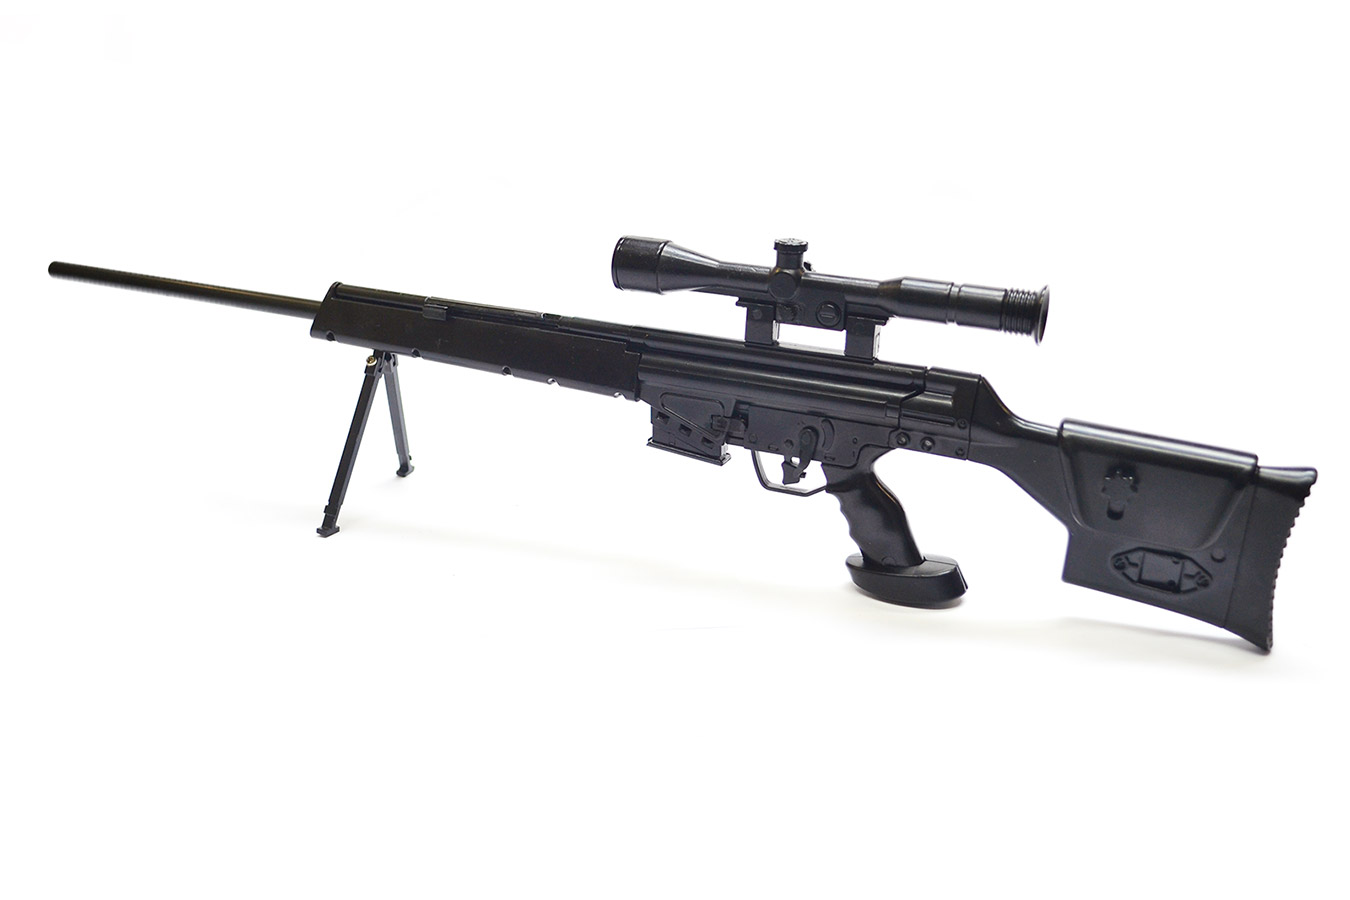 Model sniper rifle Heckler & Koch PSG-1 on a scale of 1: 3